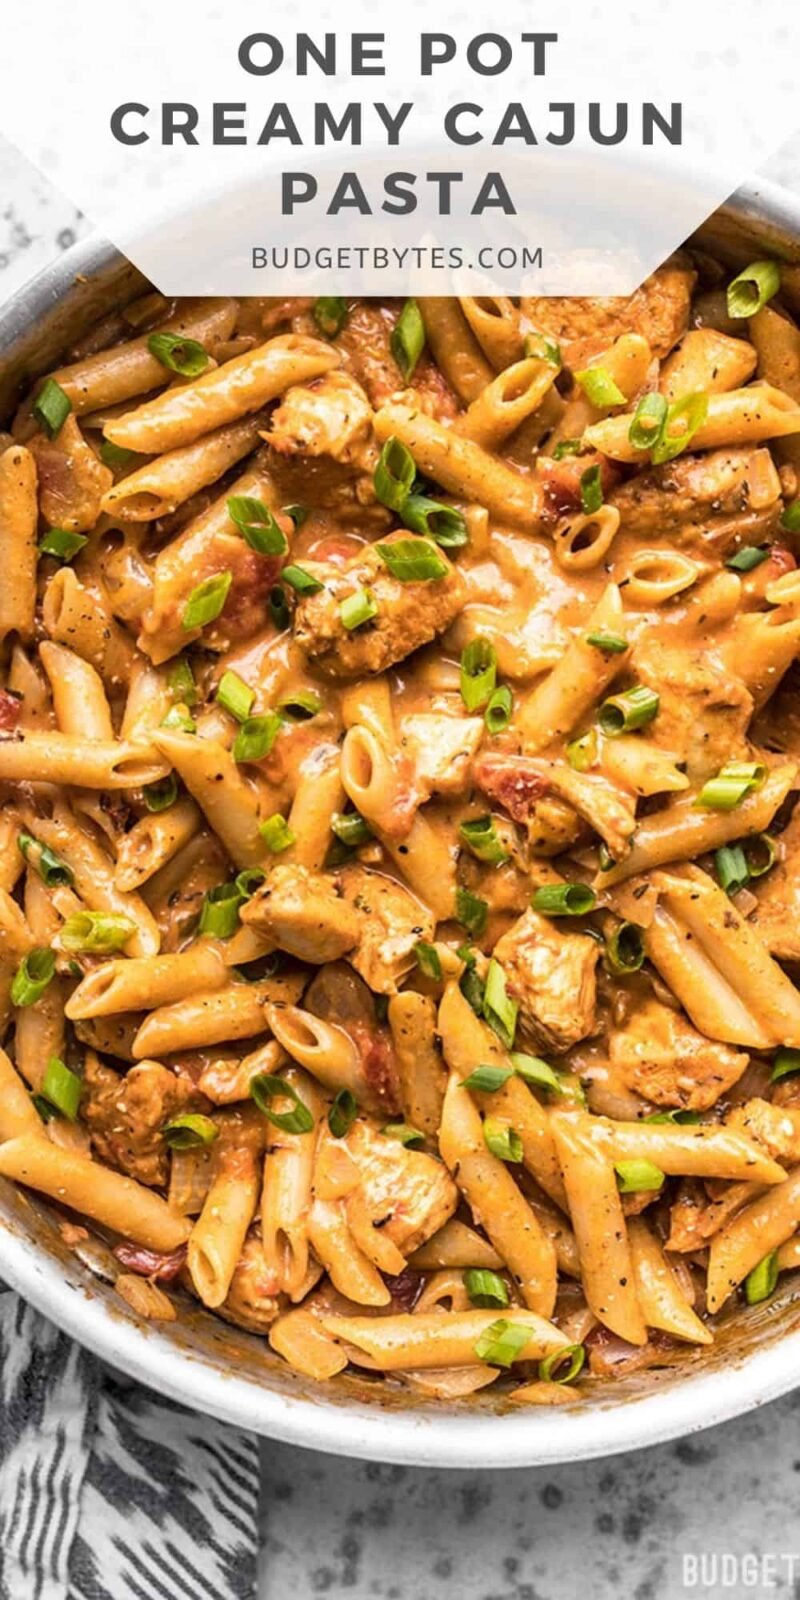 Overhead view of cajun chicken pasta in the skillet, title text at the top